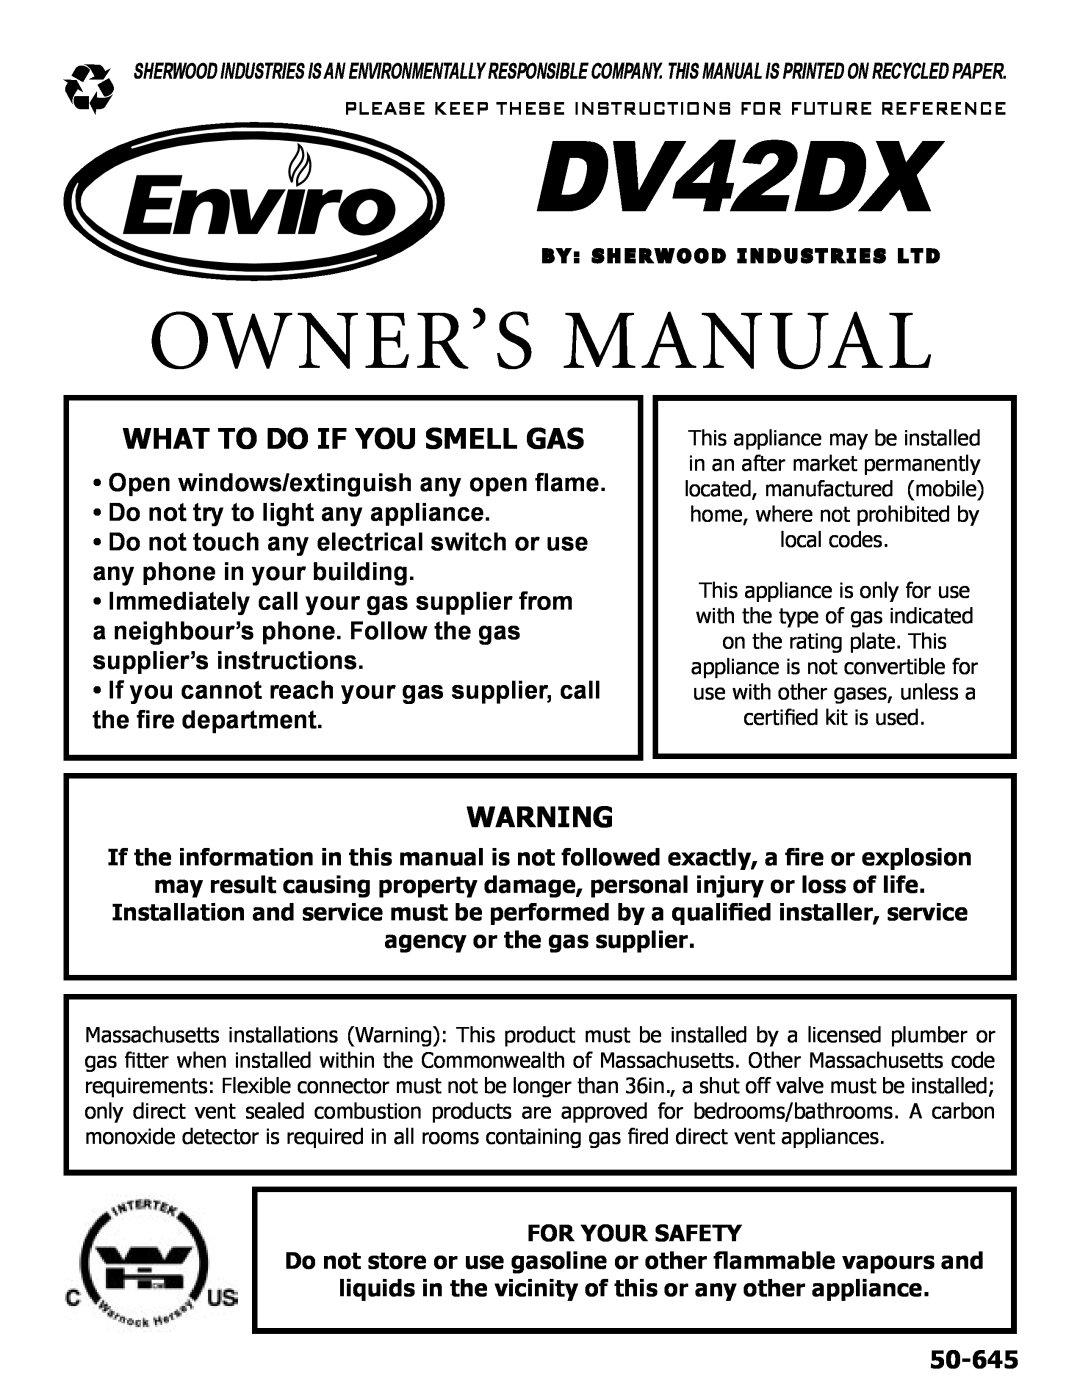 Enviro DV42DX owner manual What To Do If You Smell Gas, 50-645, Open windows/extinguish any open flame 